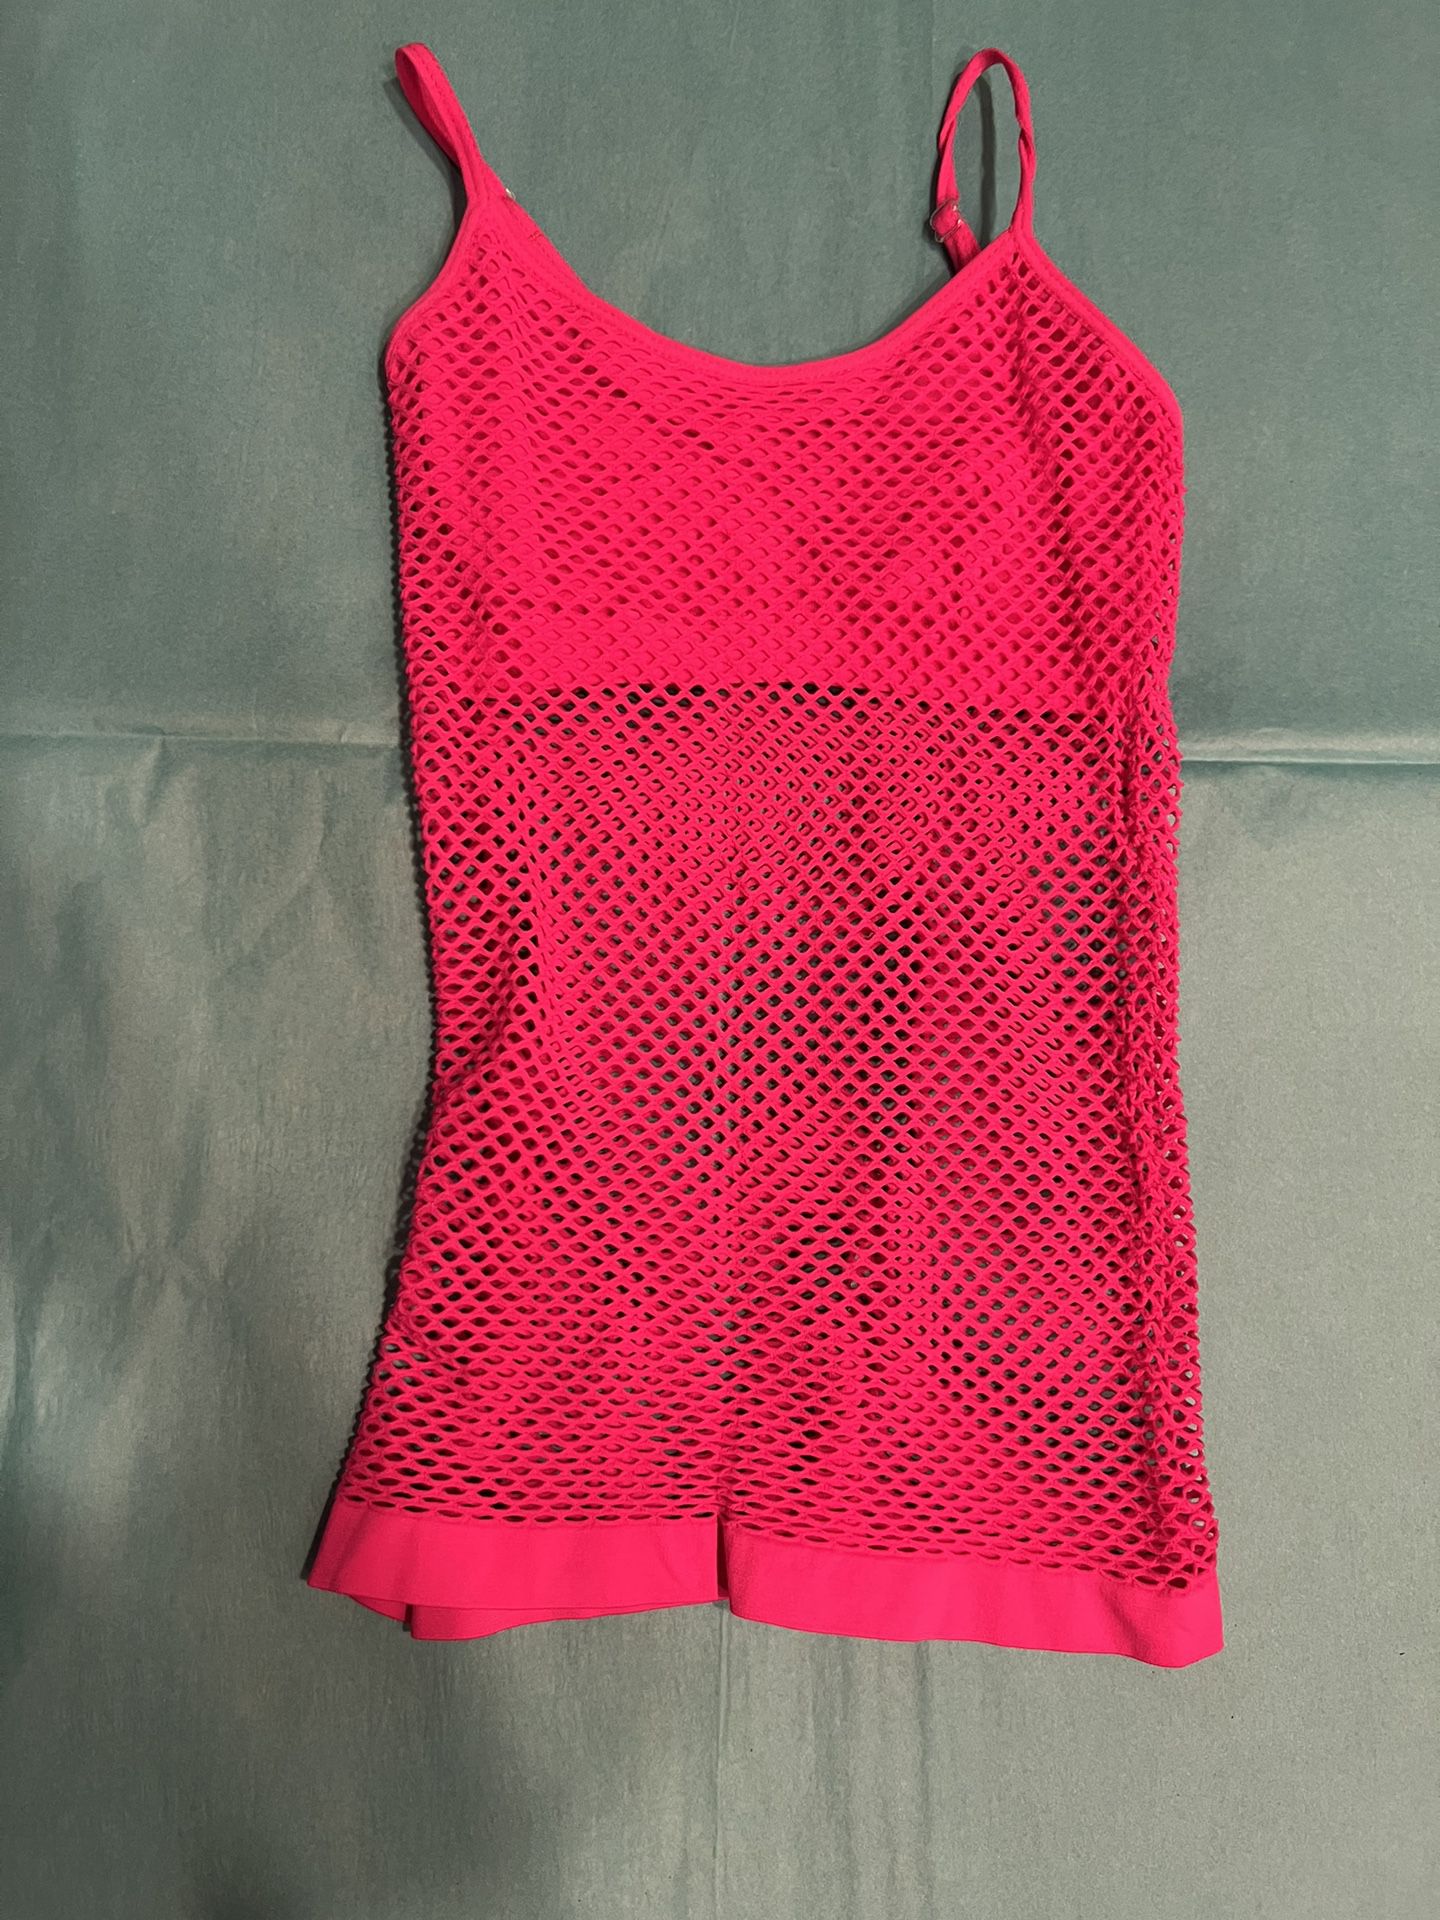 Hot Pink Fishnet Top With Bra Top 